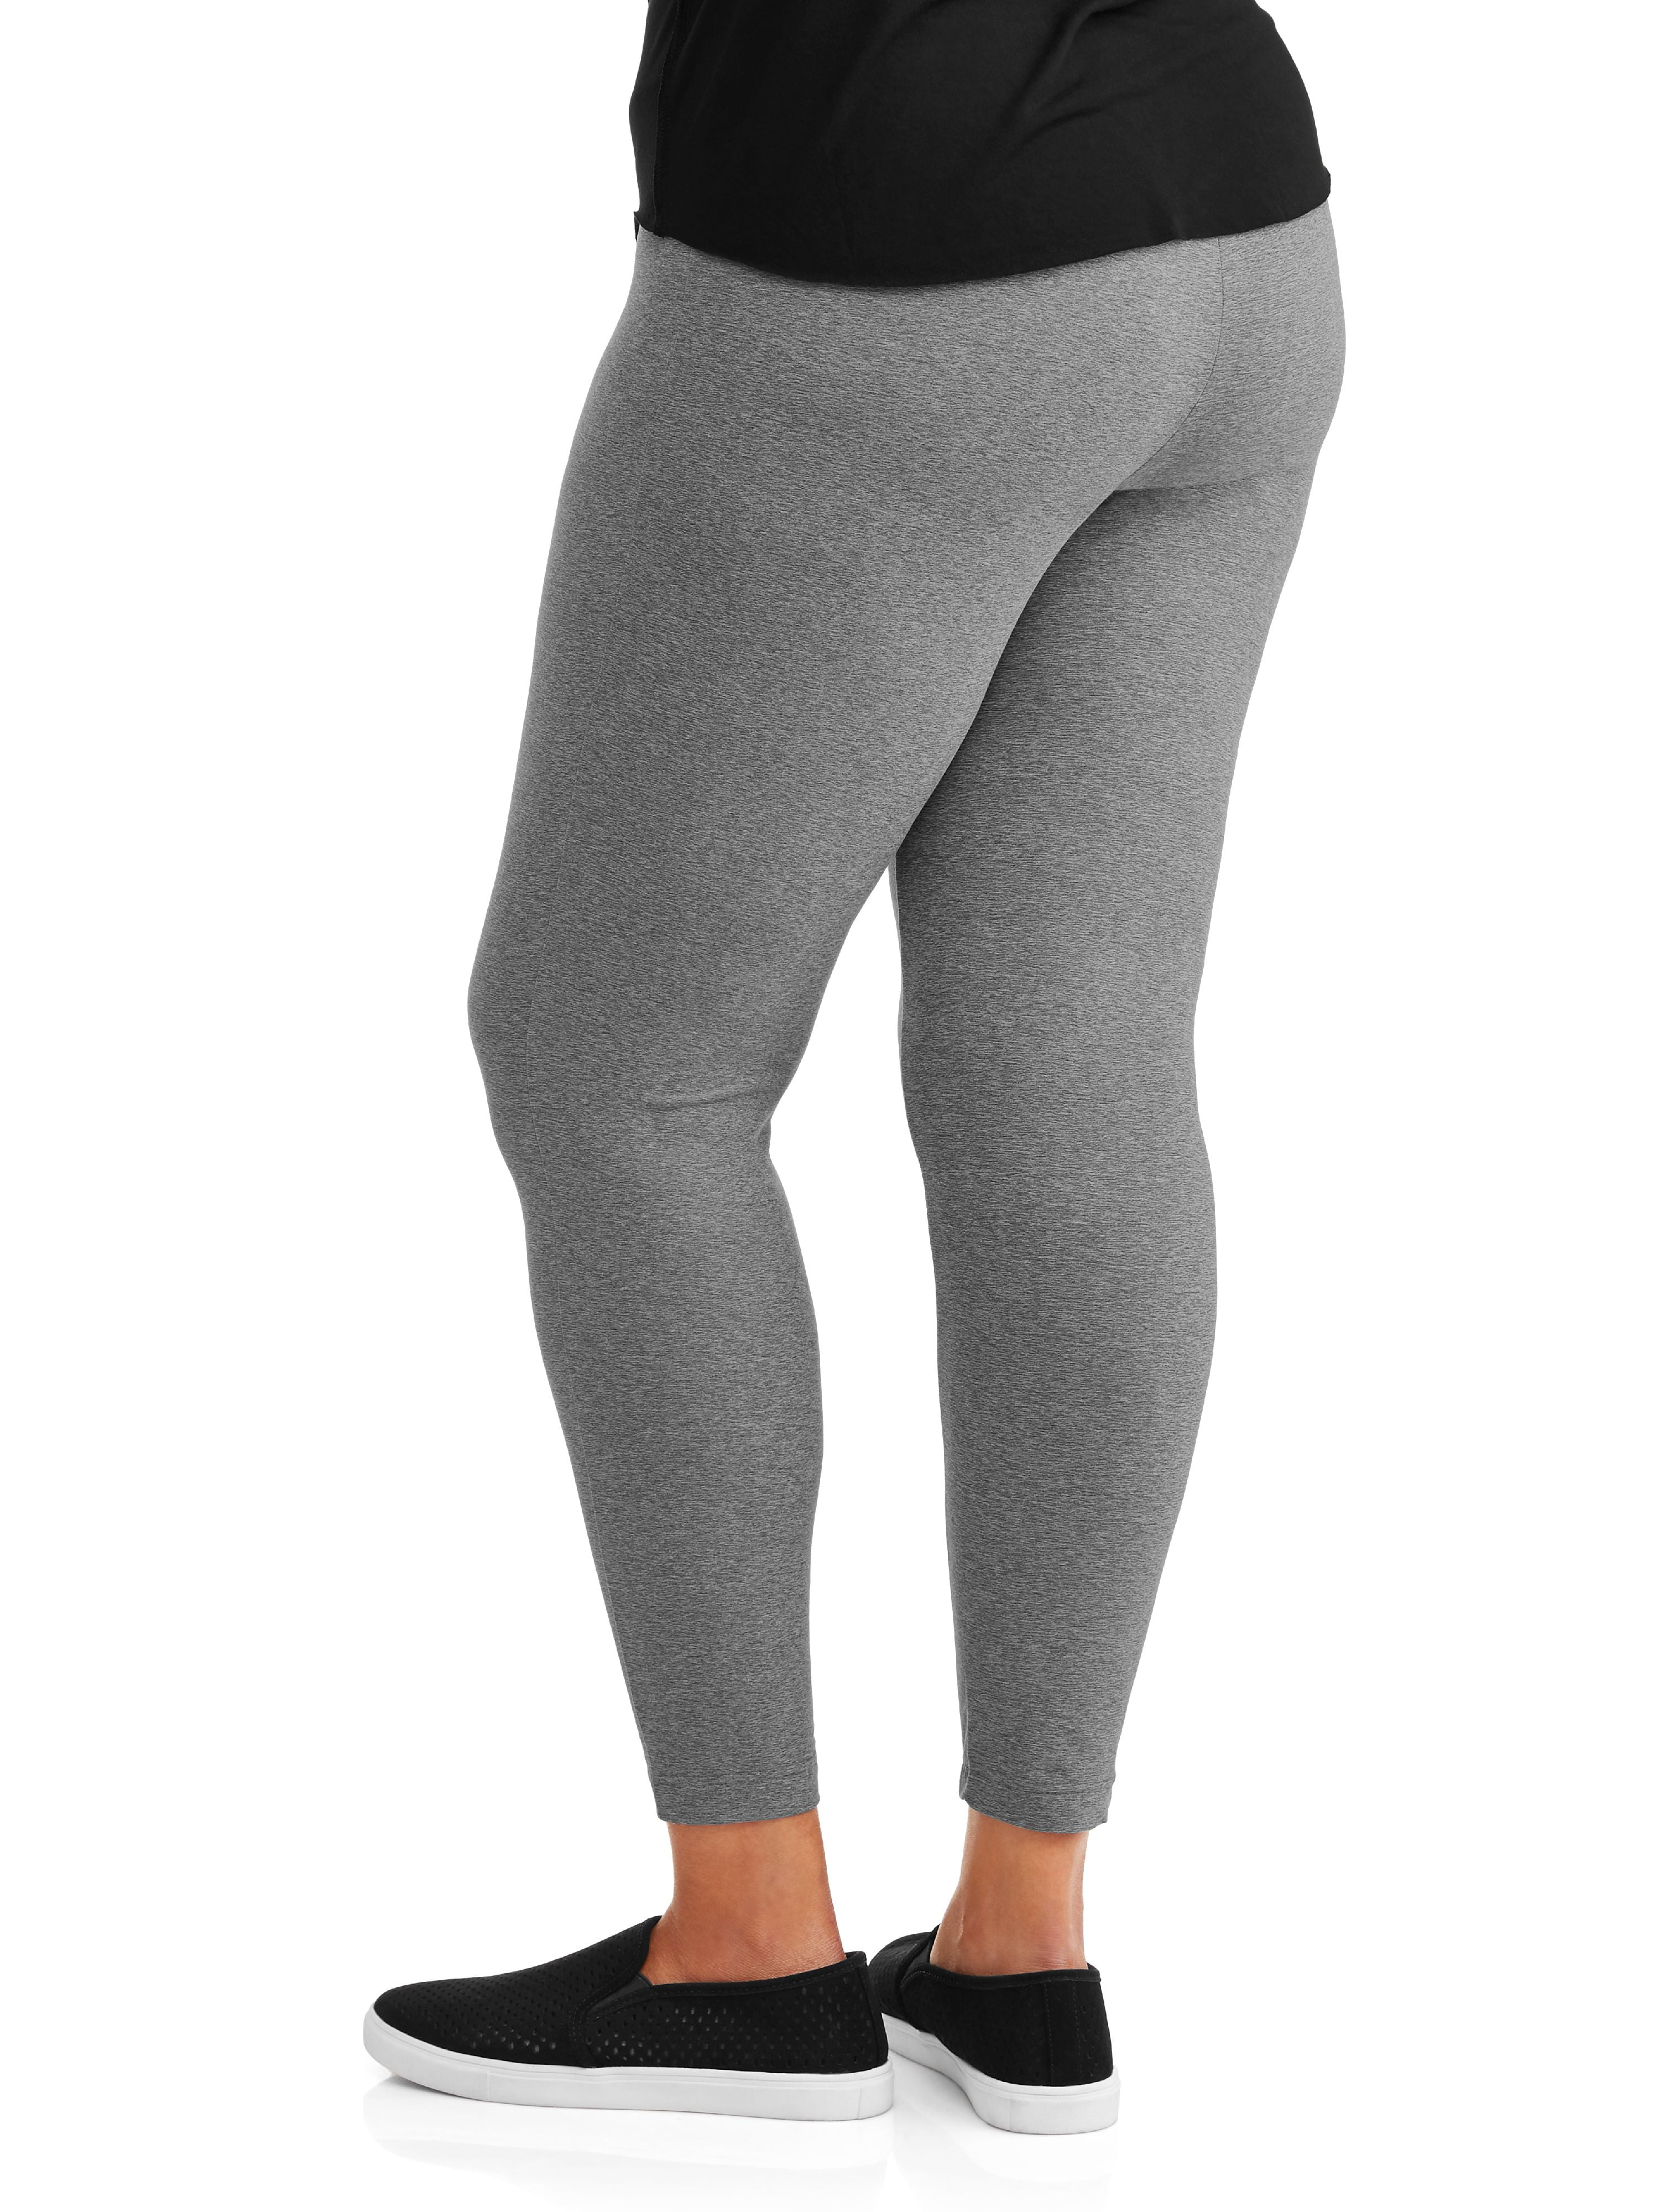 Buy VIRAL™ Leggings Soft and Pure Cotton Leggings for Women and Girls/Combo  (Pack of 8)/ Size- XL, XXL. at